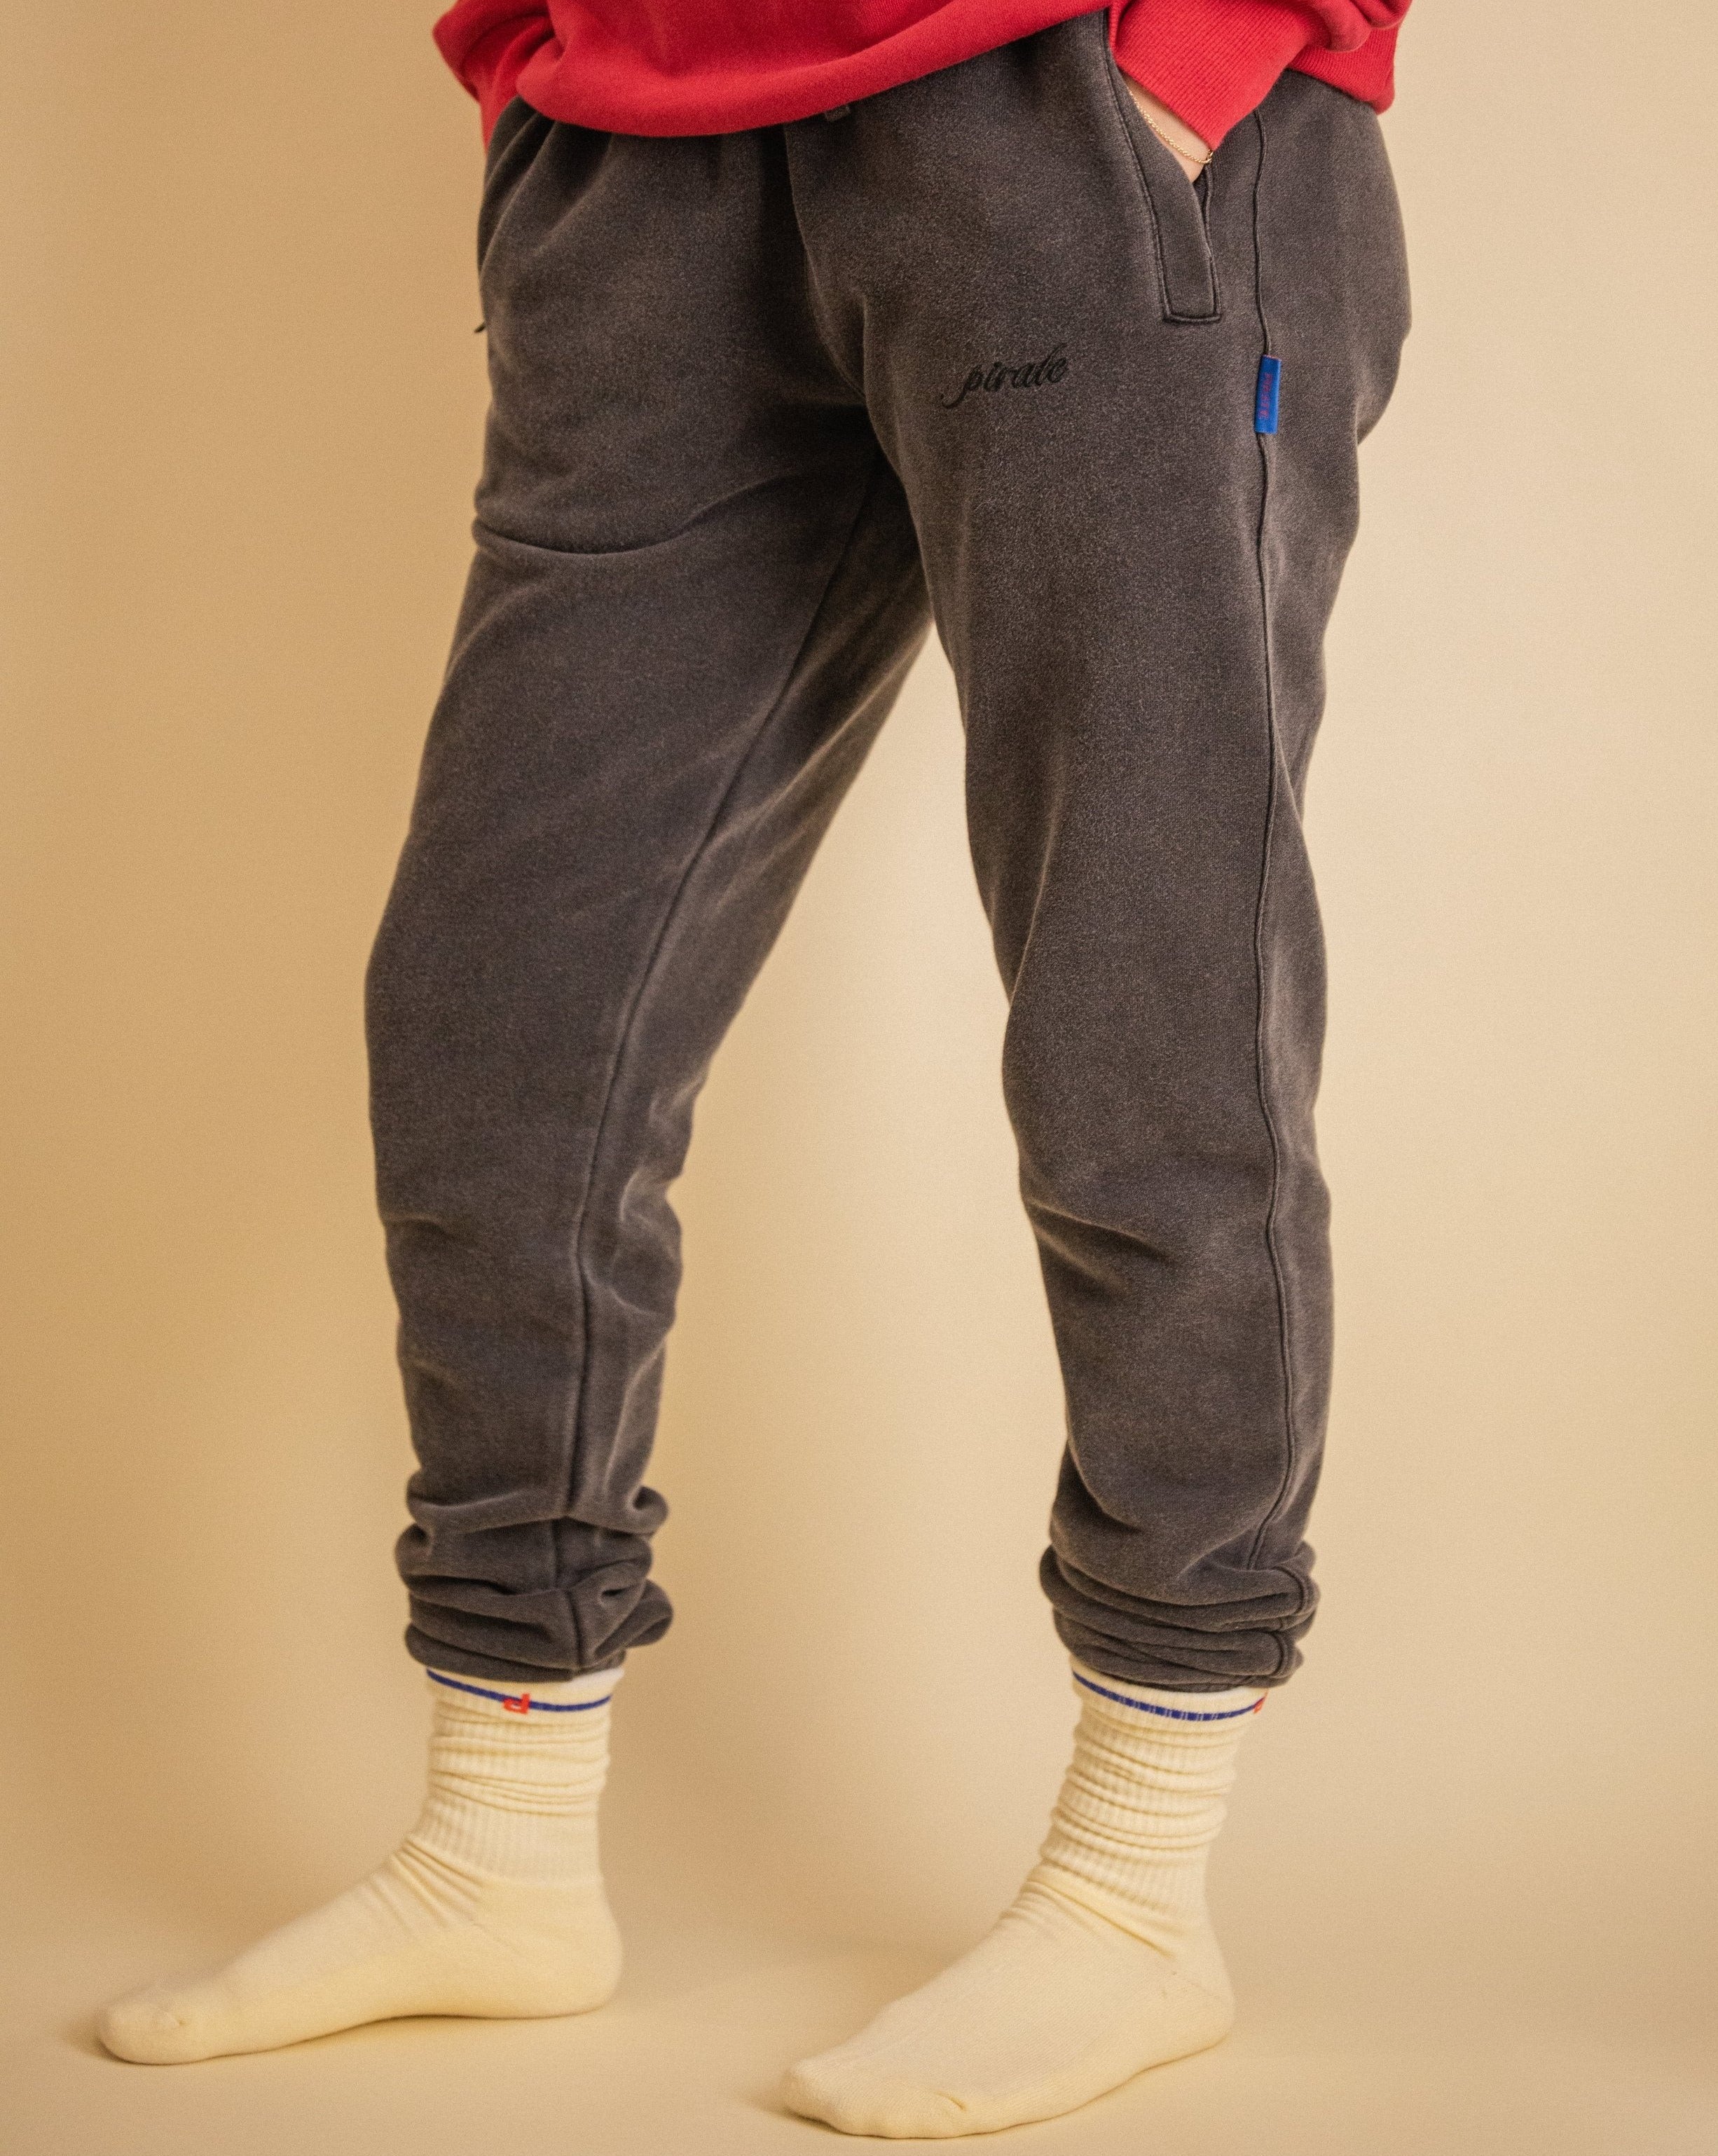 Pirate Hilltop French Terry Sweat Pant (Muddy Black)